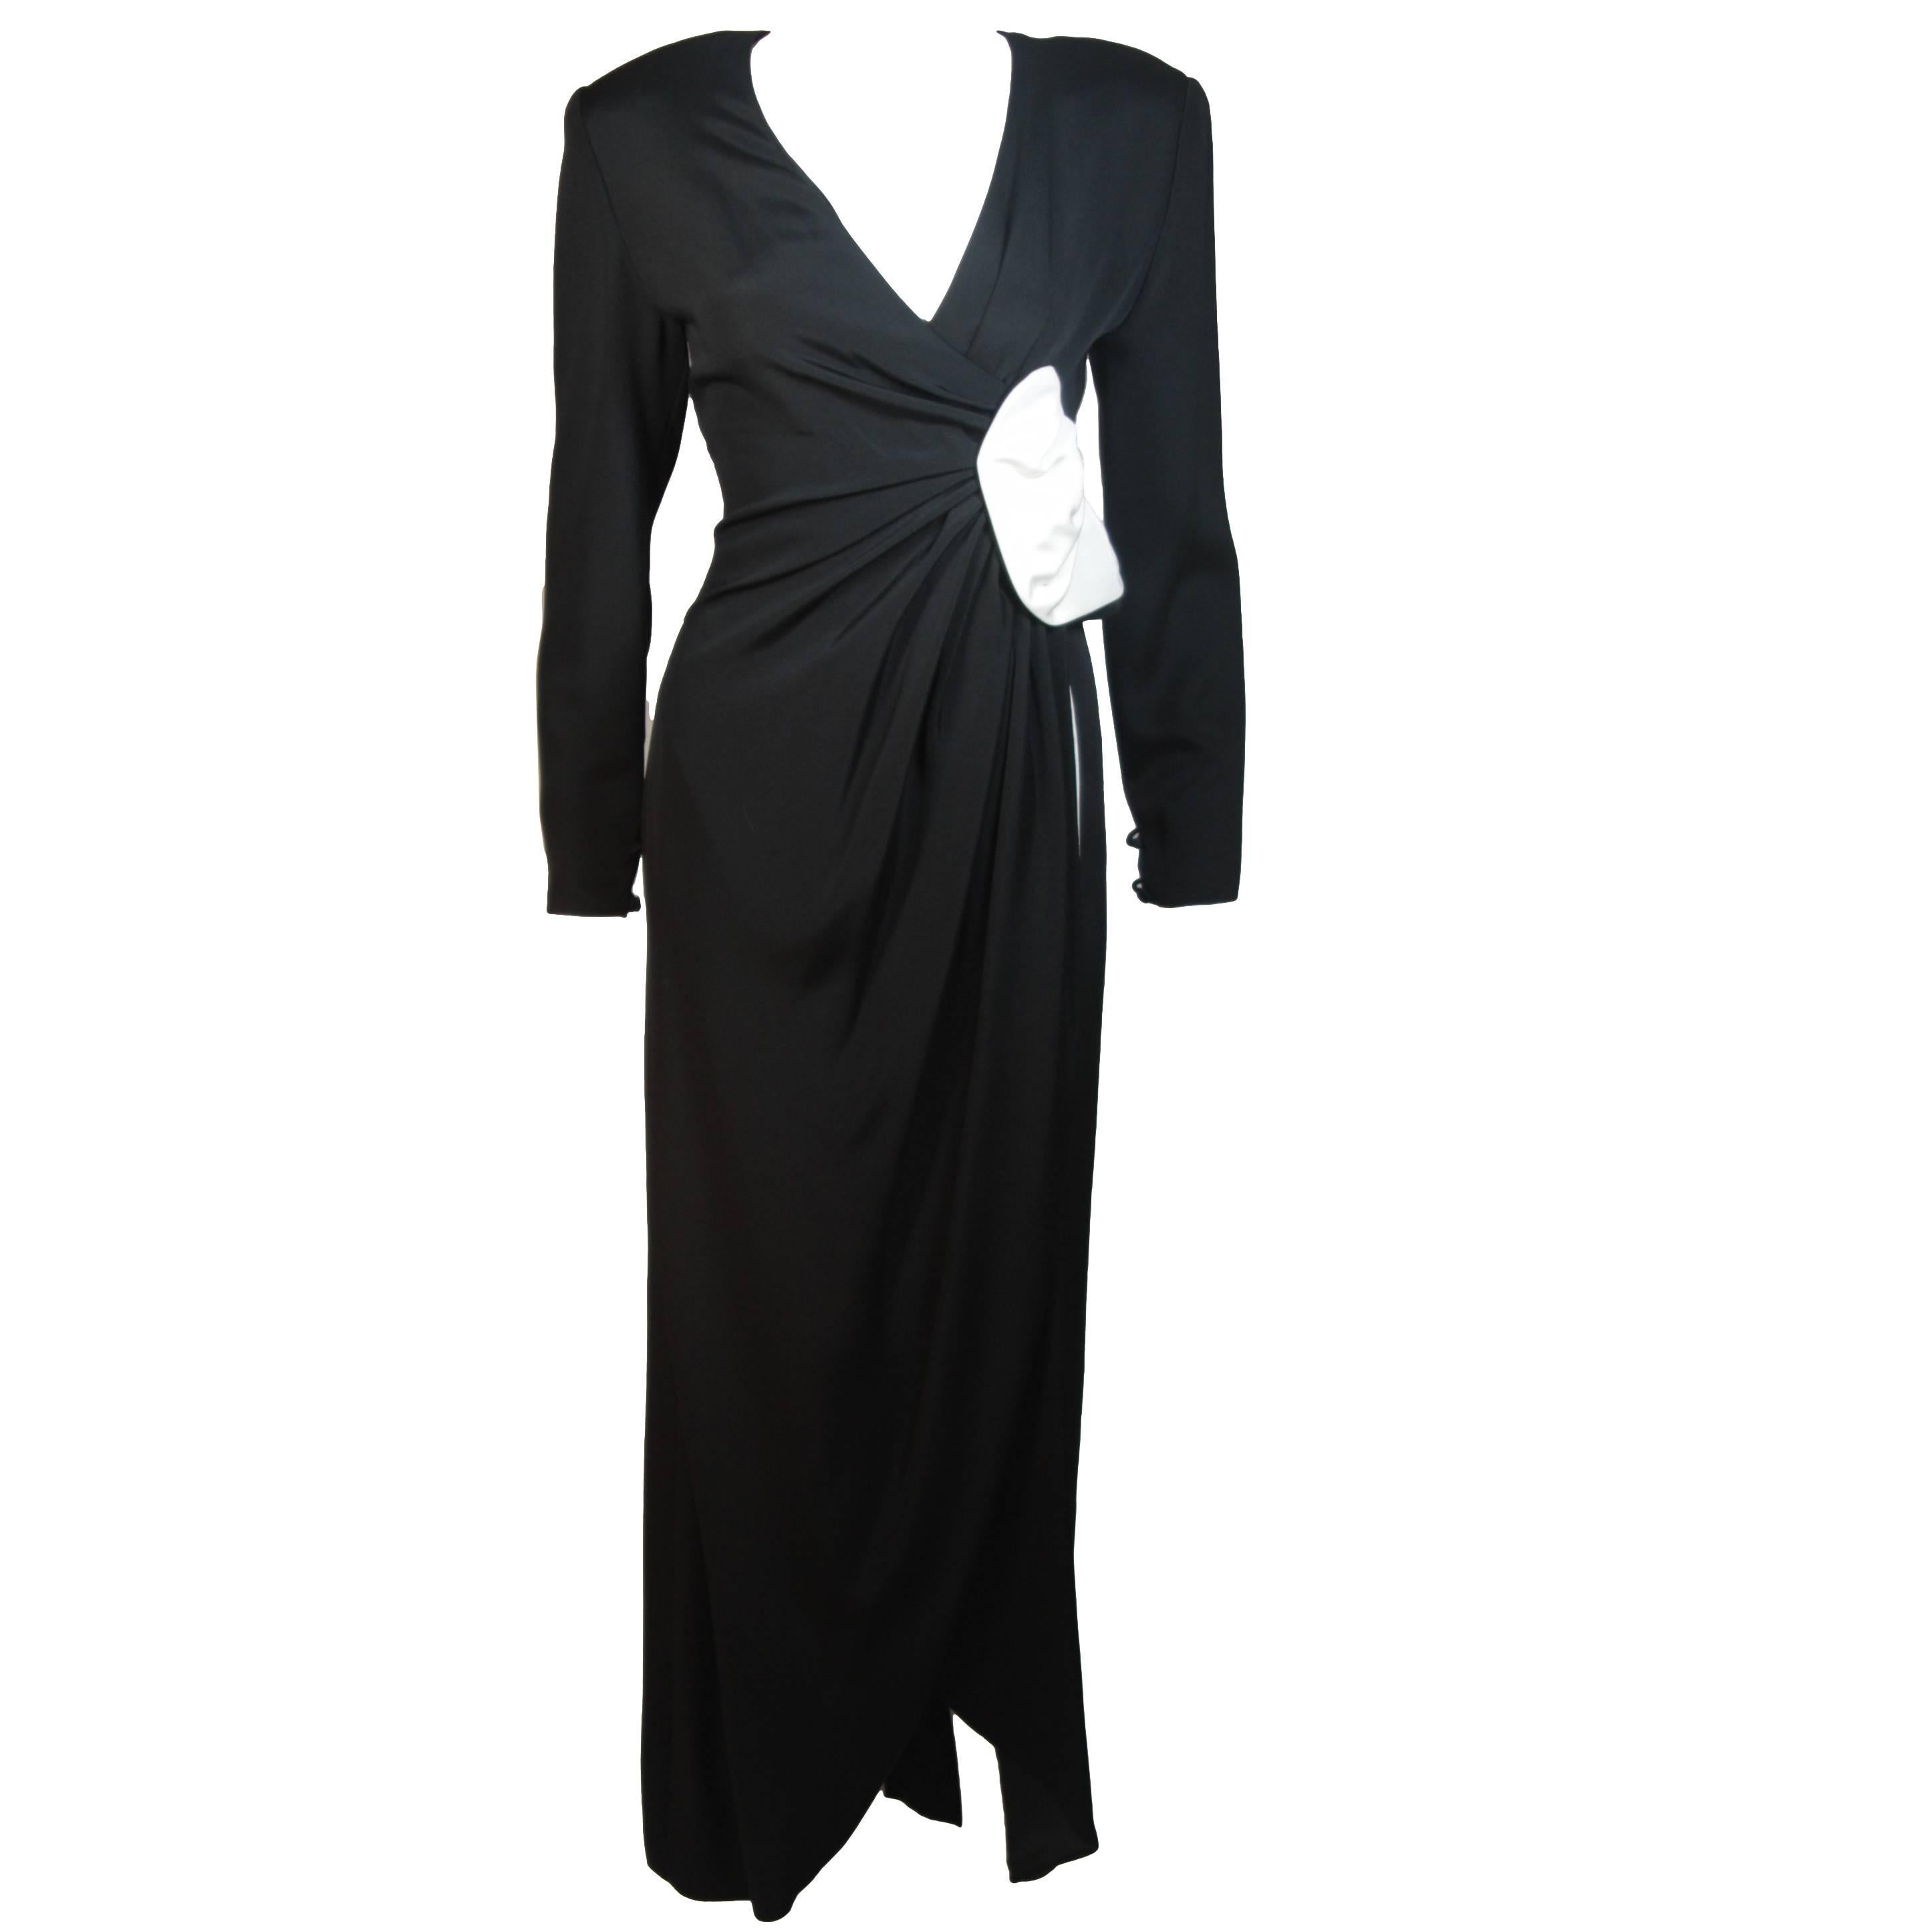 NOLAN MILLER Black and White Contrast Gown with Drape Detail Size 6 For Sale